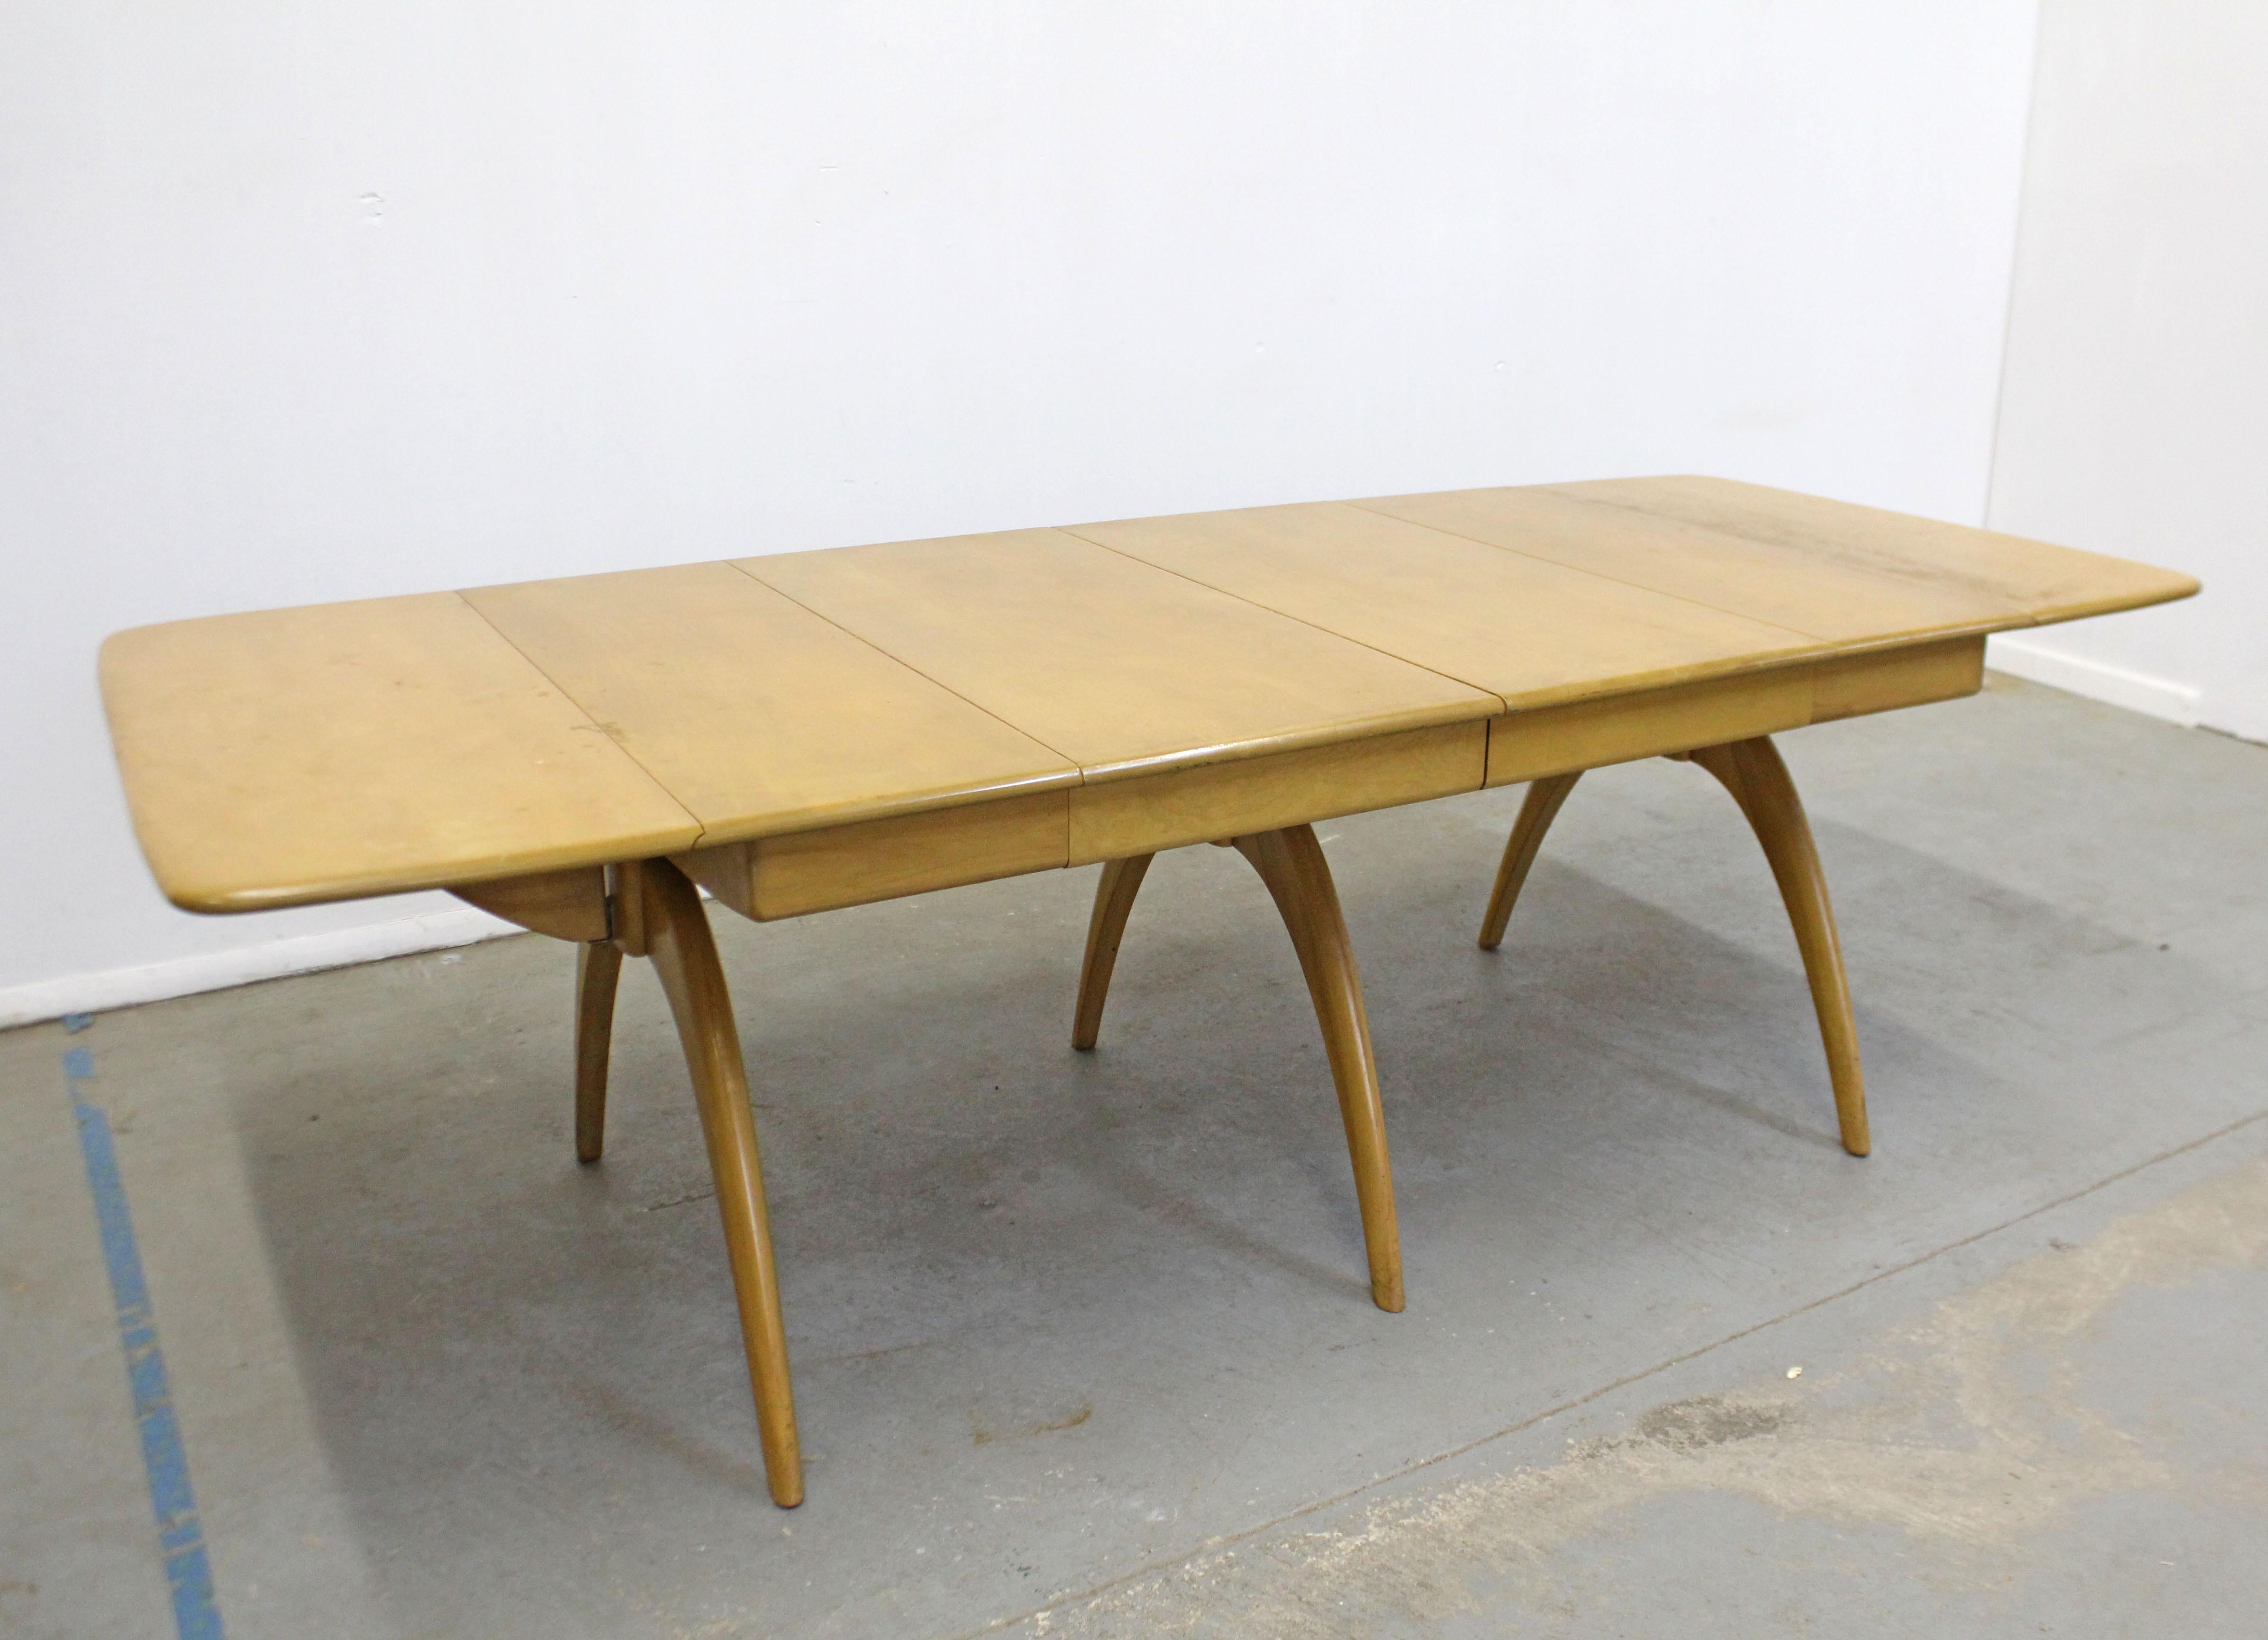 What a find. Offered is a Heywood Wakefield 'Butterfly' drop-leaf dining table with two extension leaves in a wheat finish. Even with its strong construction and sturdiness, this table features a particularly streamlined design and is ideal for